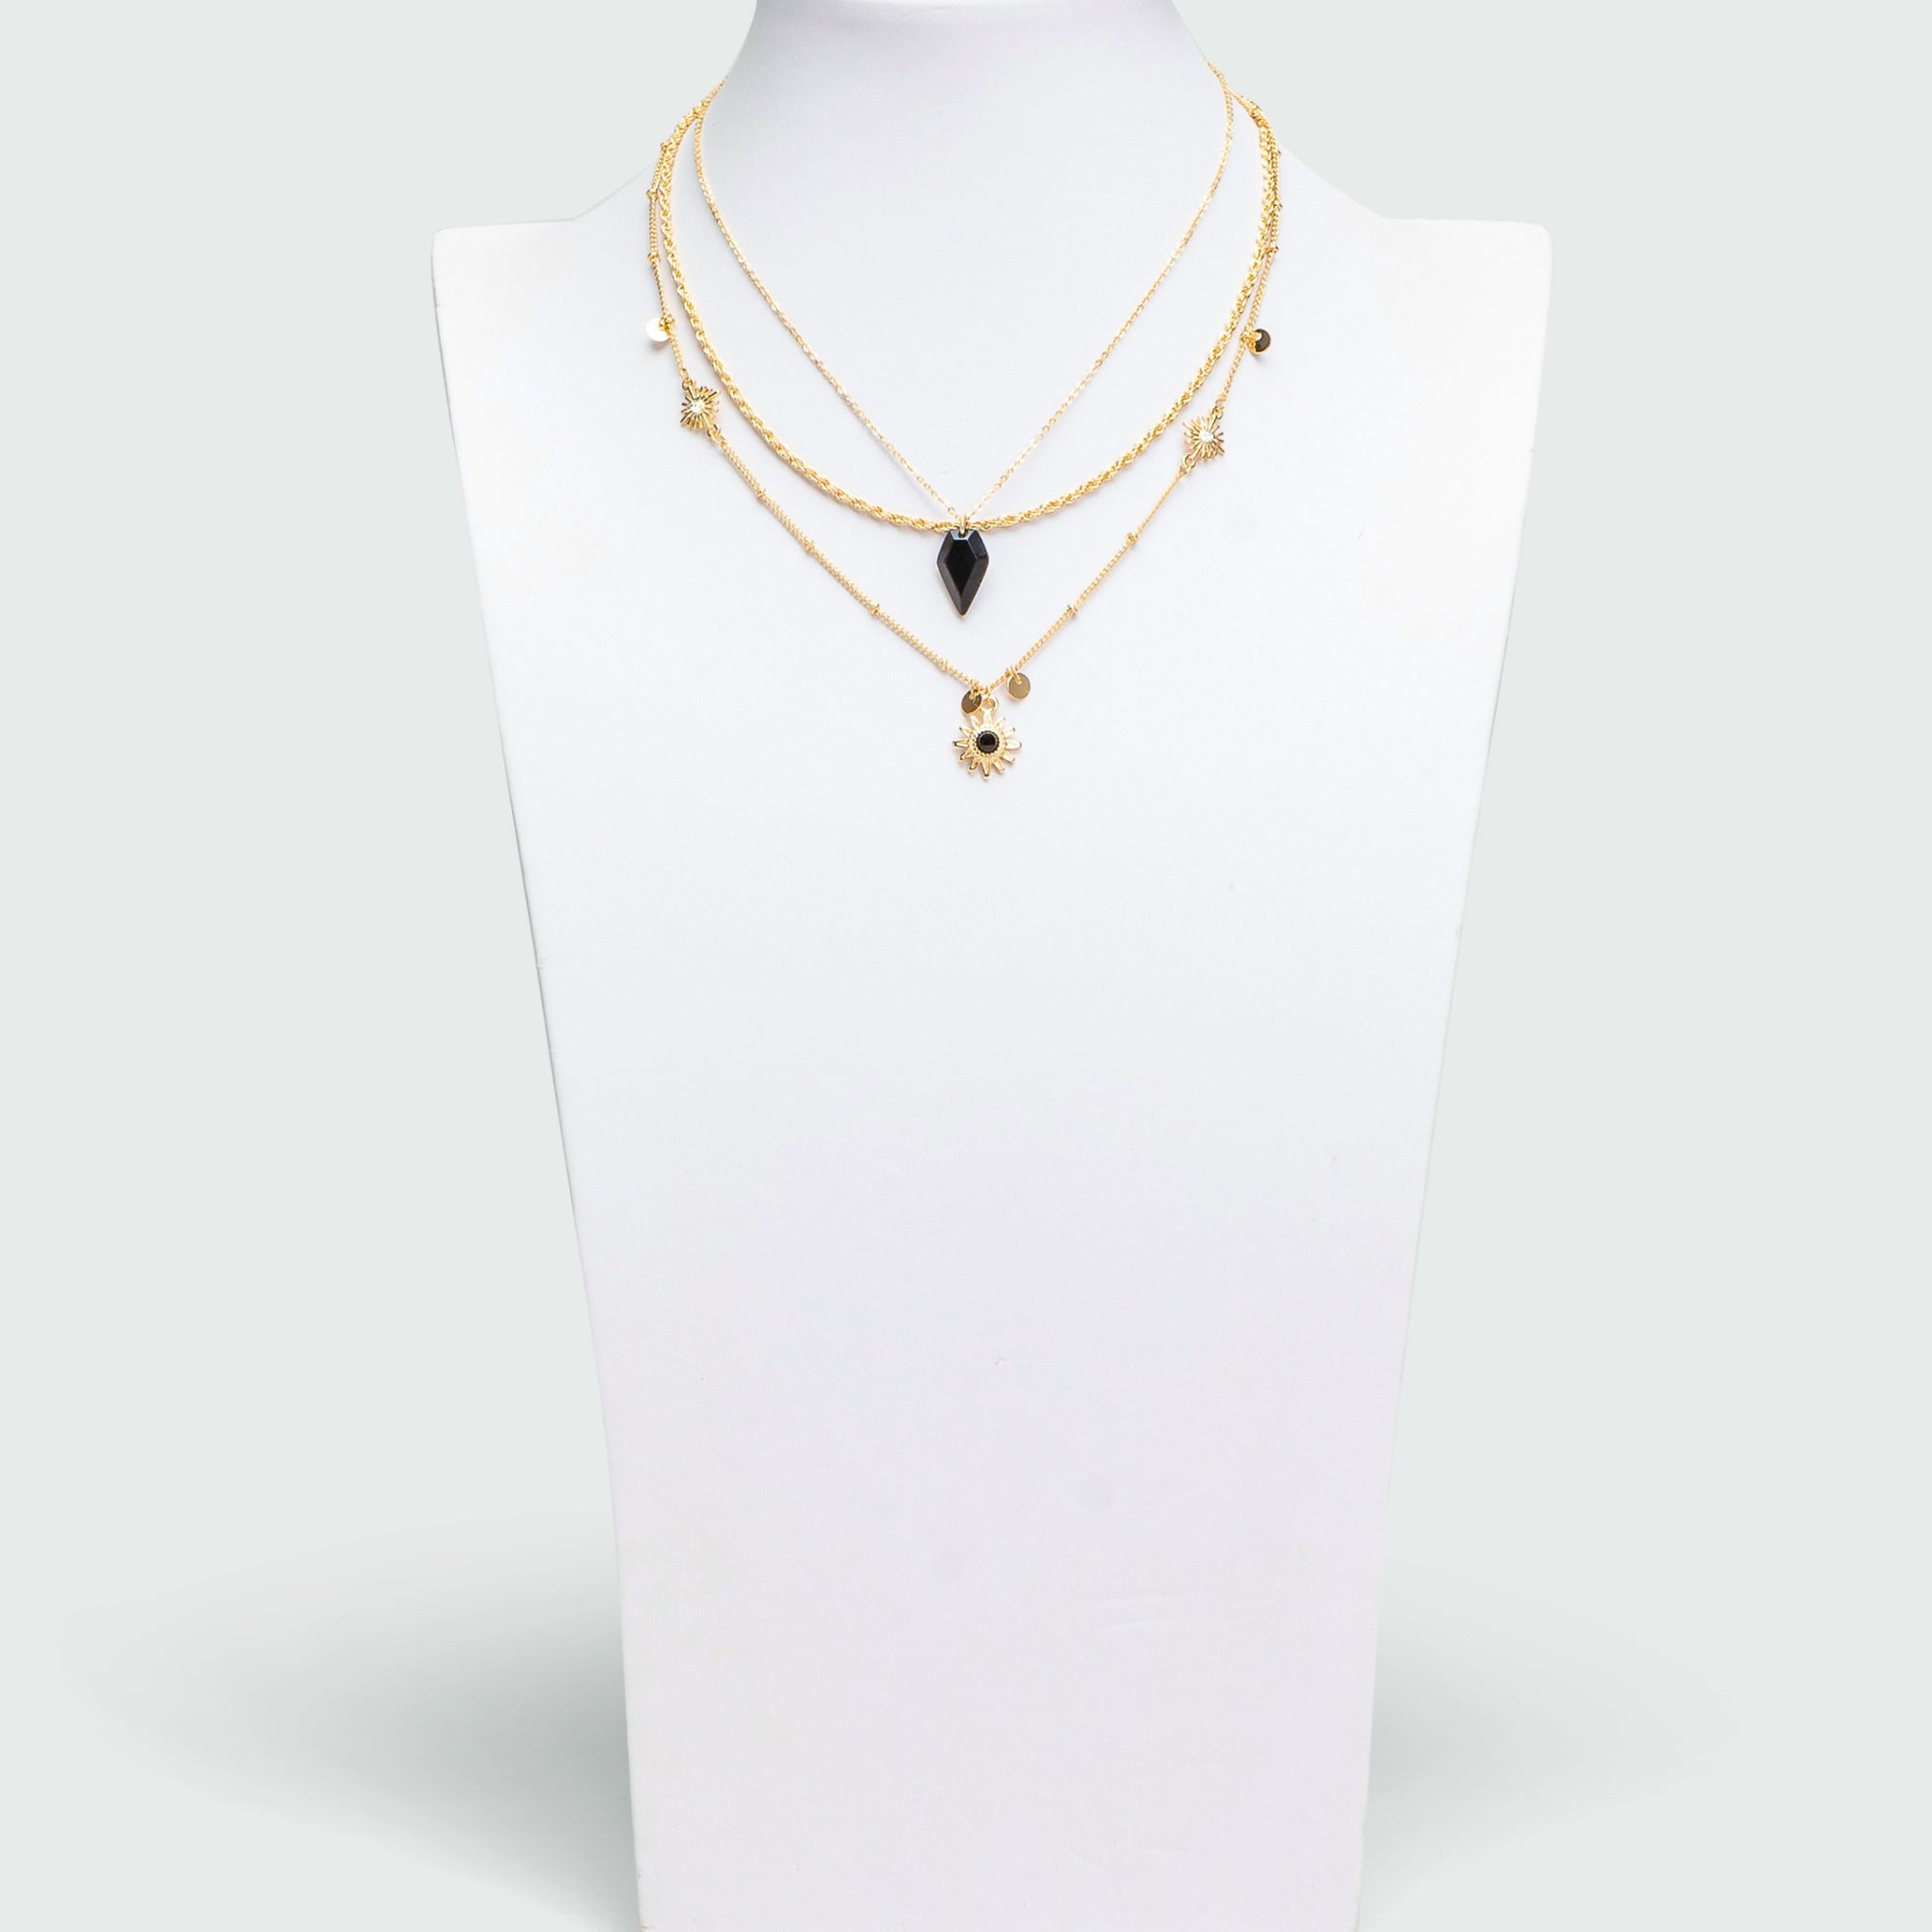 Set of three golden versatile necklaces with multiple charms